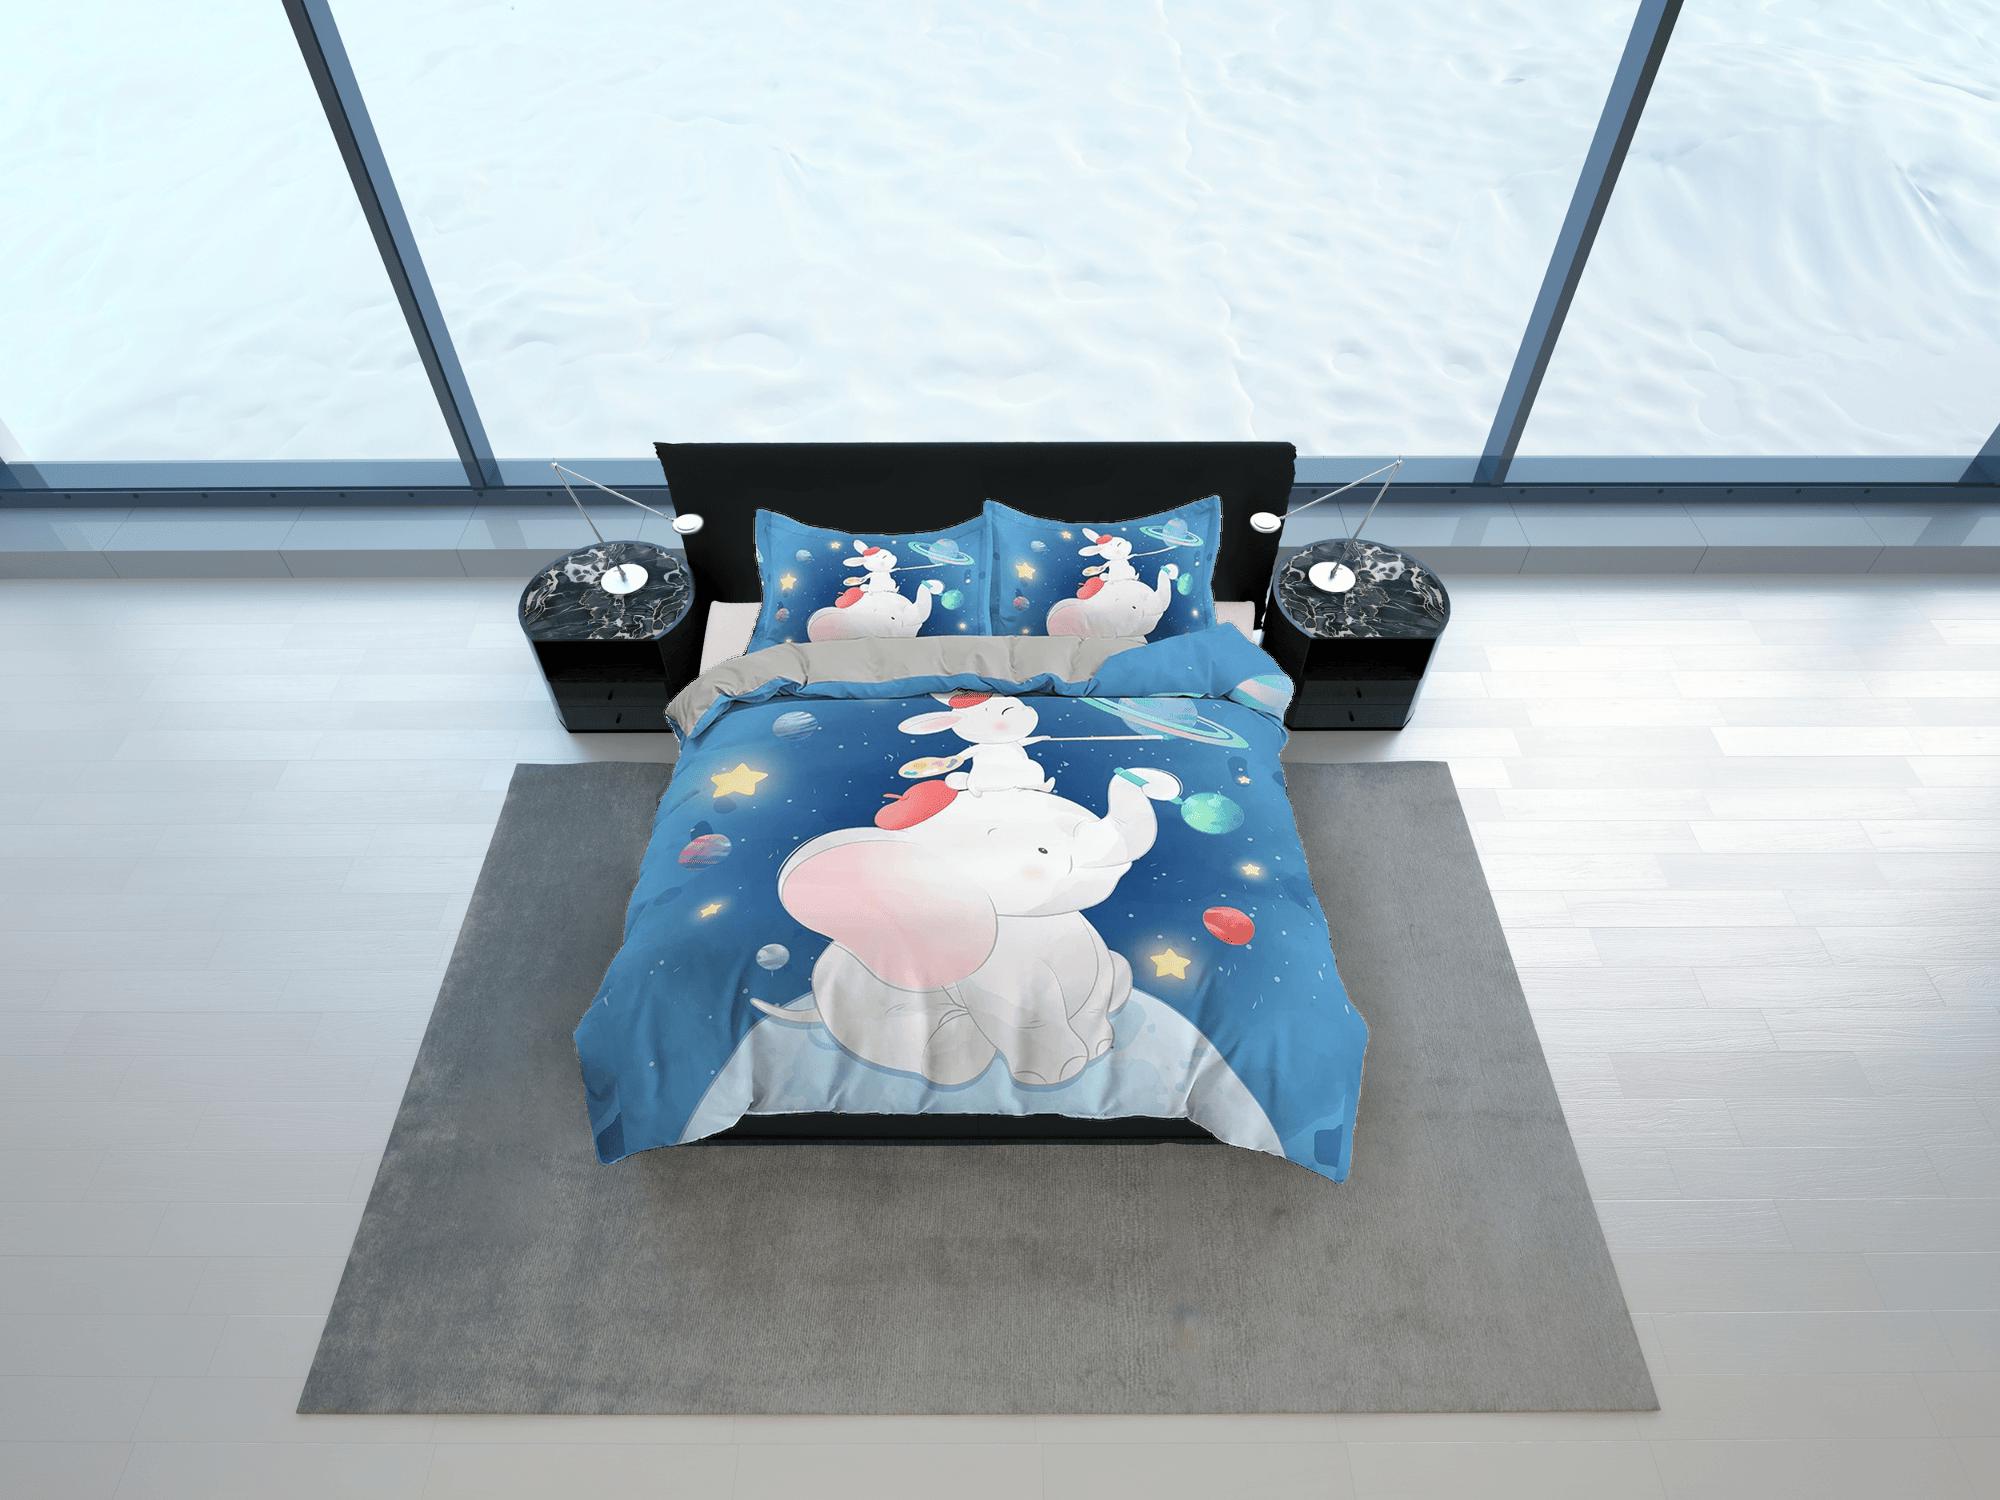 daintyduvet Elephant and mouse blue toddler bedding, unique duvet cover for nursery, crib bedding pillowcase, baby zipper bedding, king queen full twin